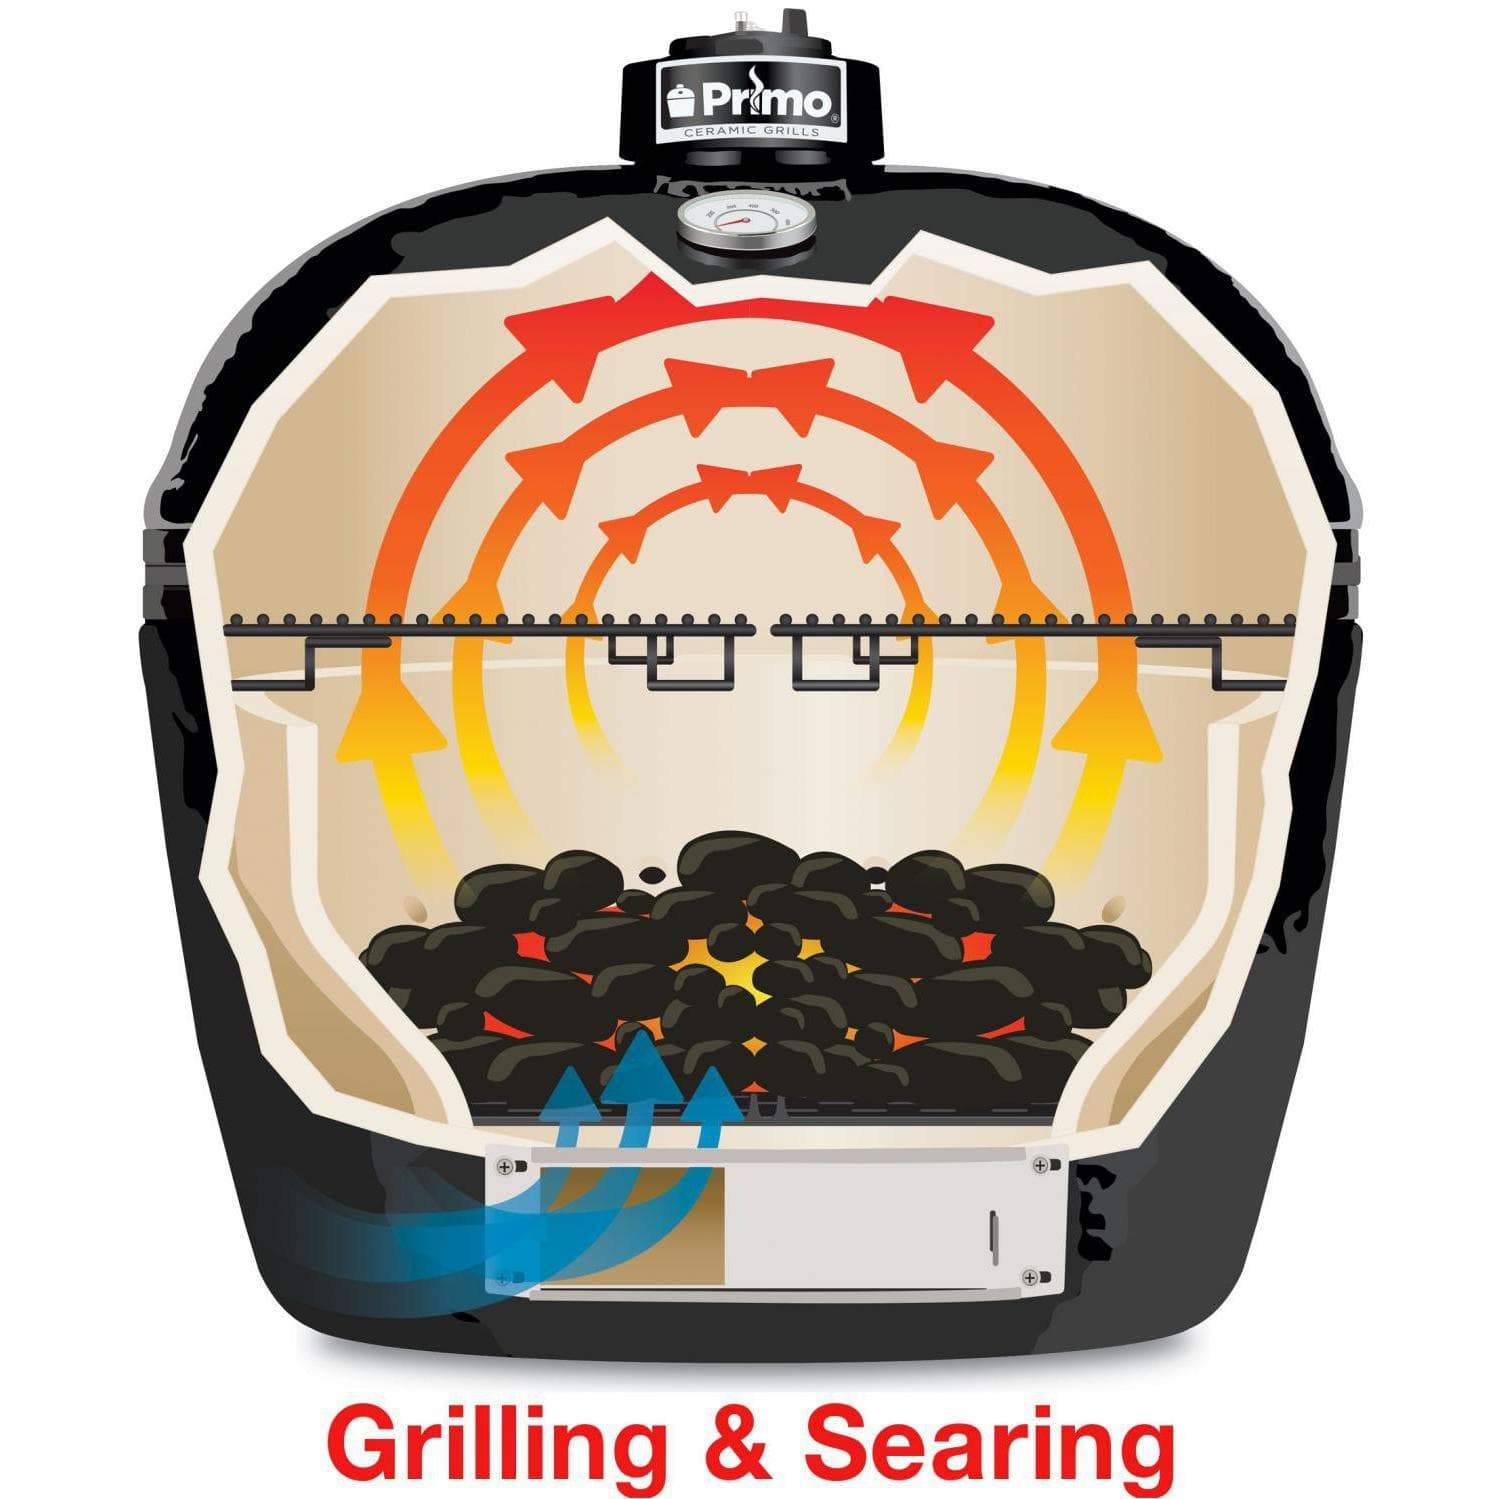 Primo Grills Kamado Grill Charcoal Primo Grills Oval JR 200 All-In-One (Heavy-Duty Stand, Side Shelves, Ash Tool and Grate Lifter)